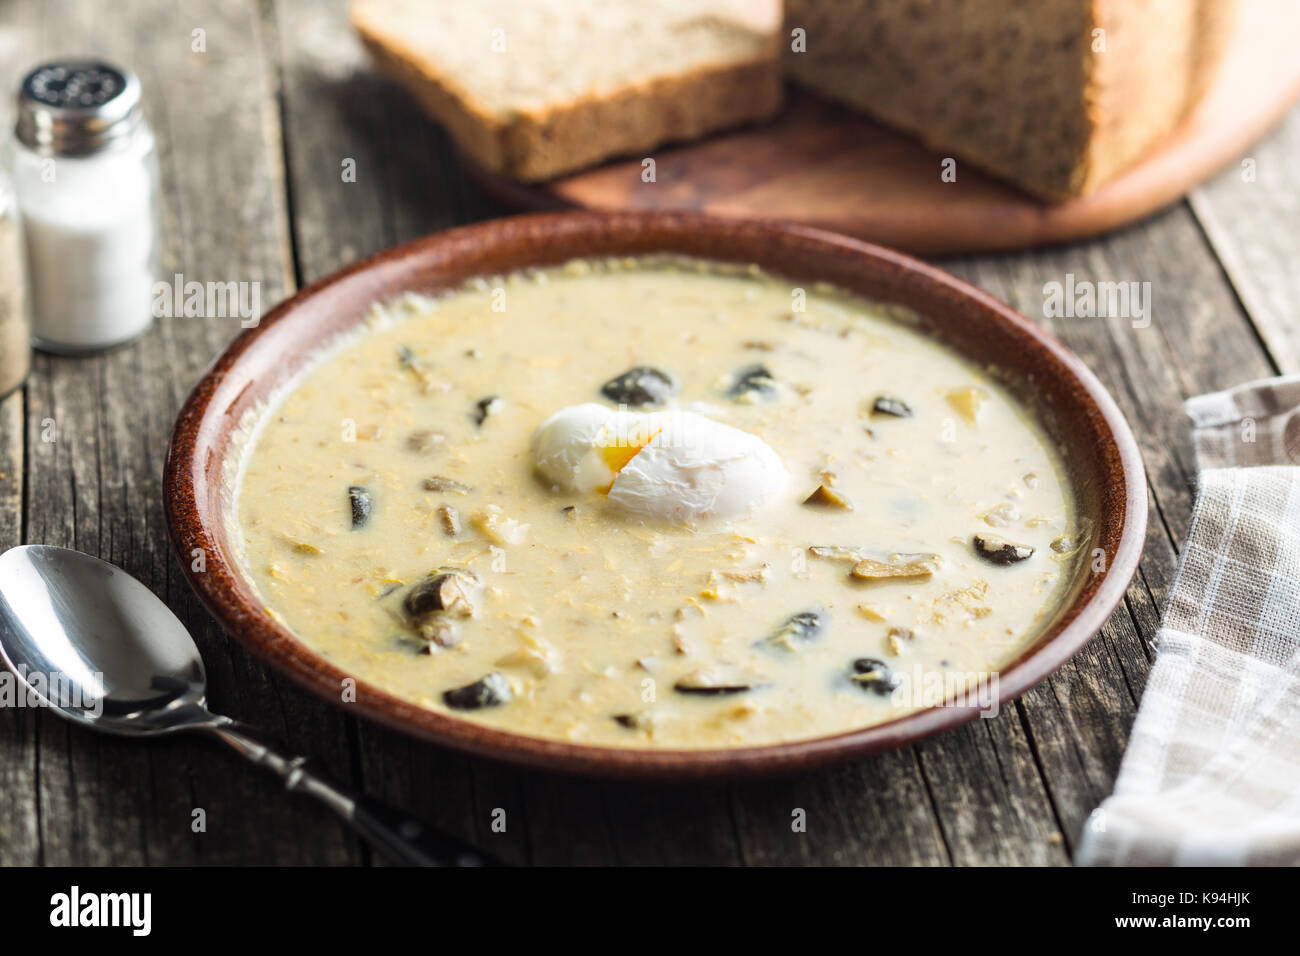 Cream of mushroom soup with poached egg. Stock Photo